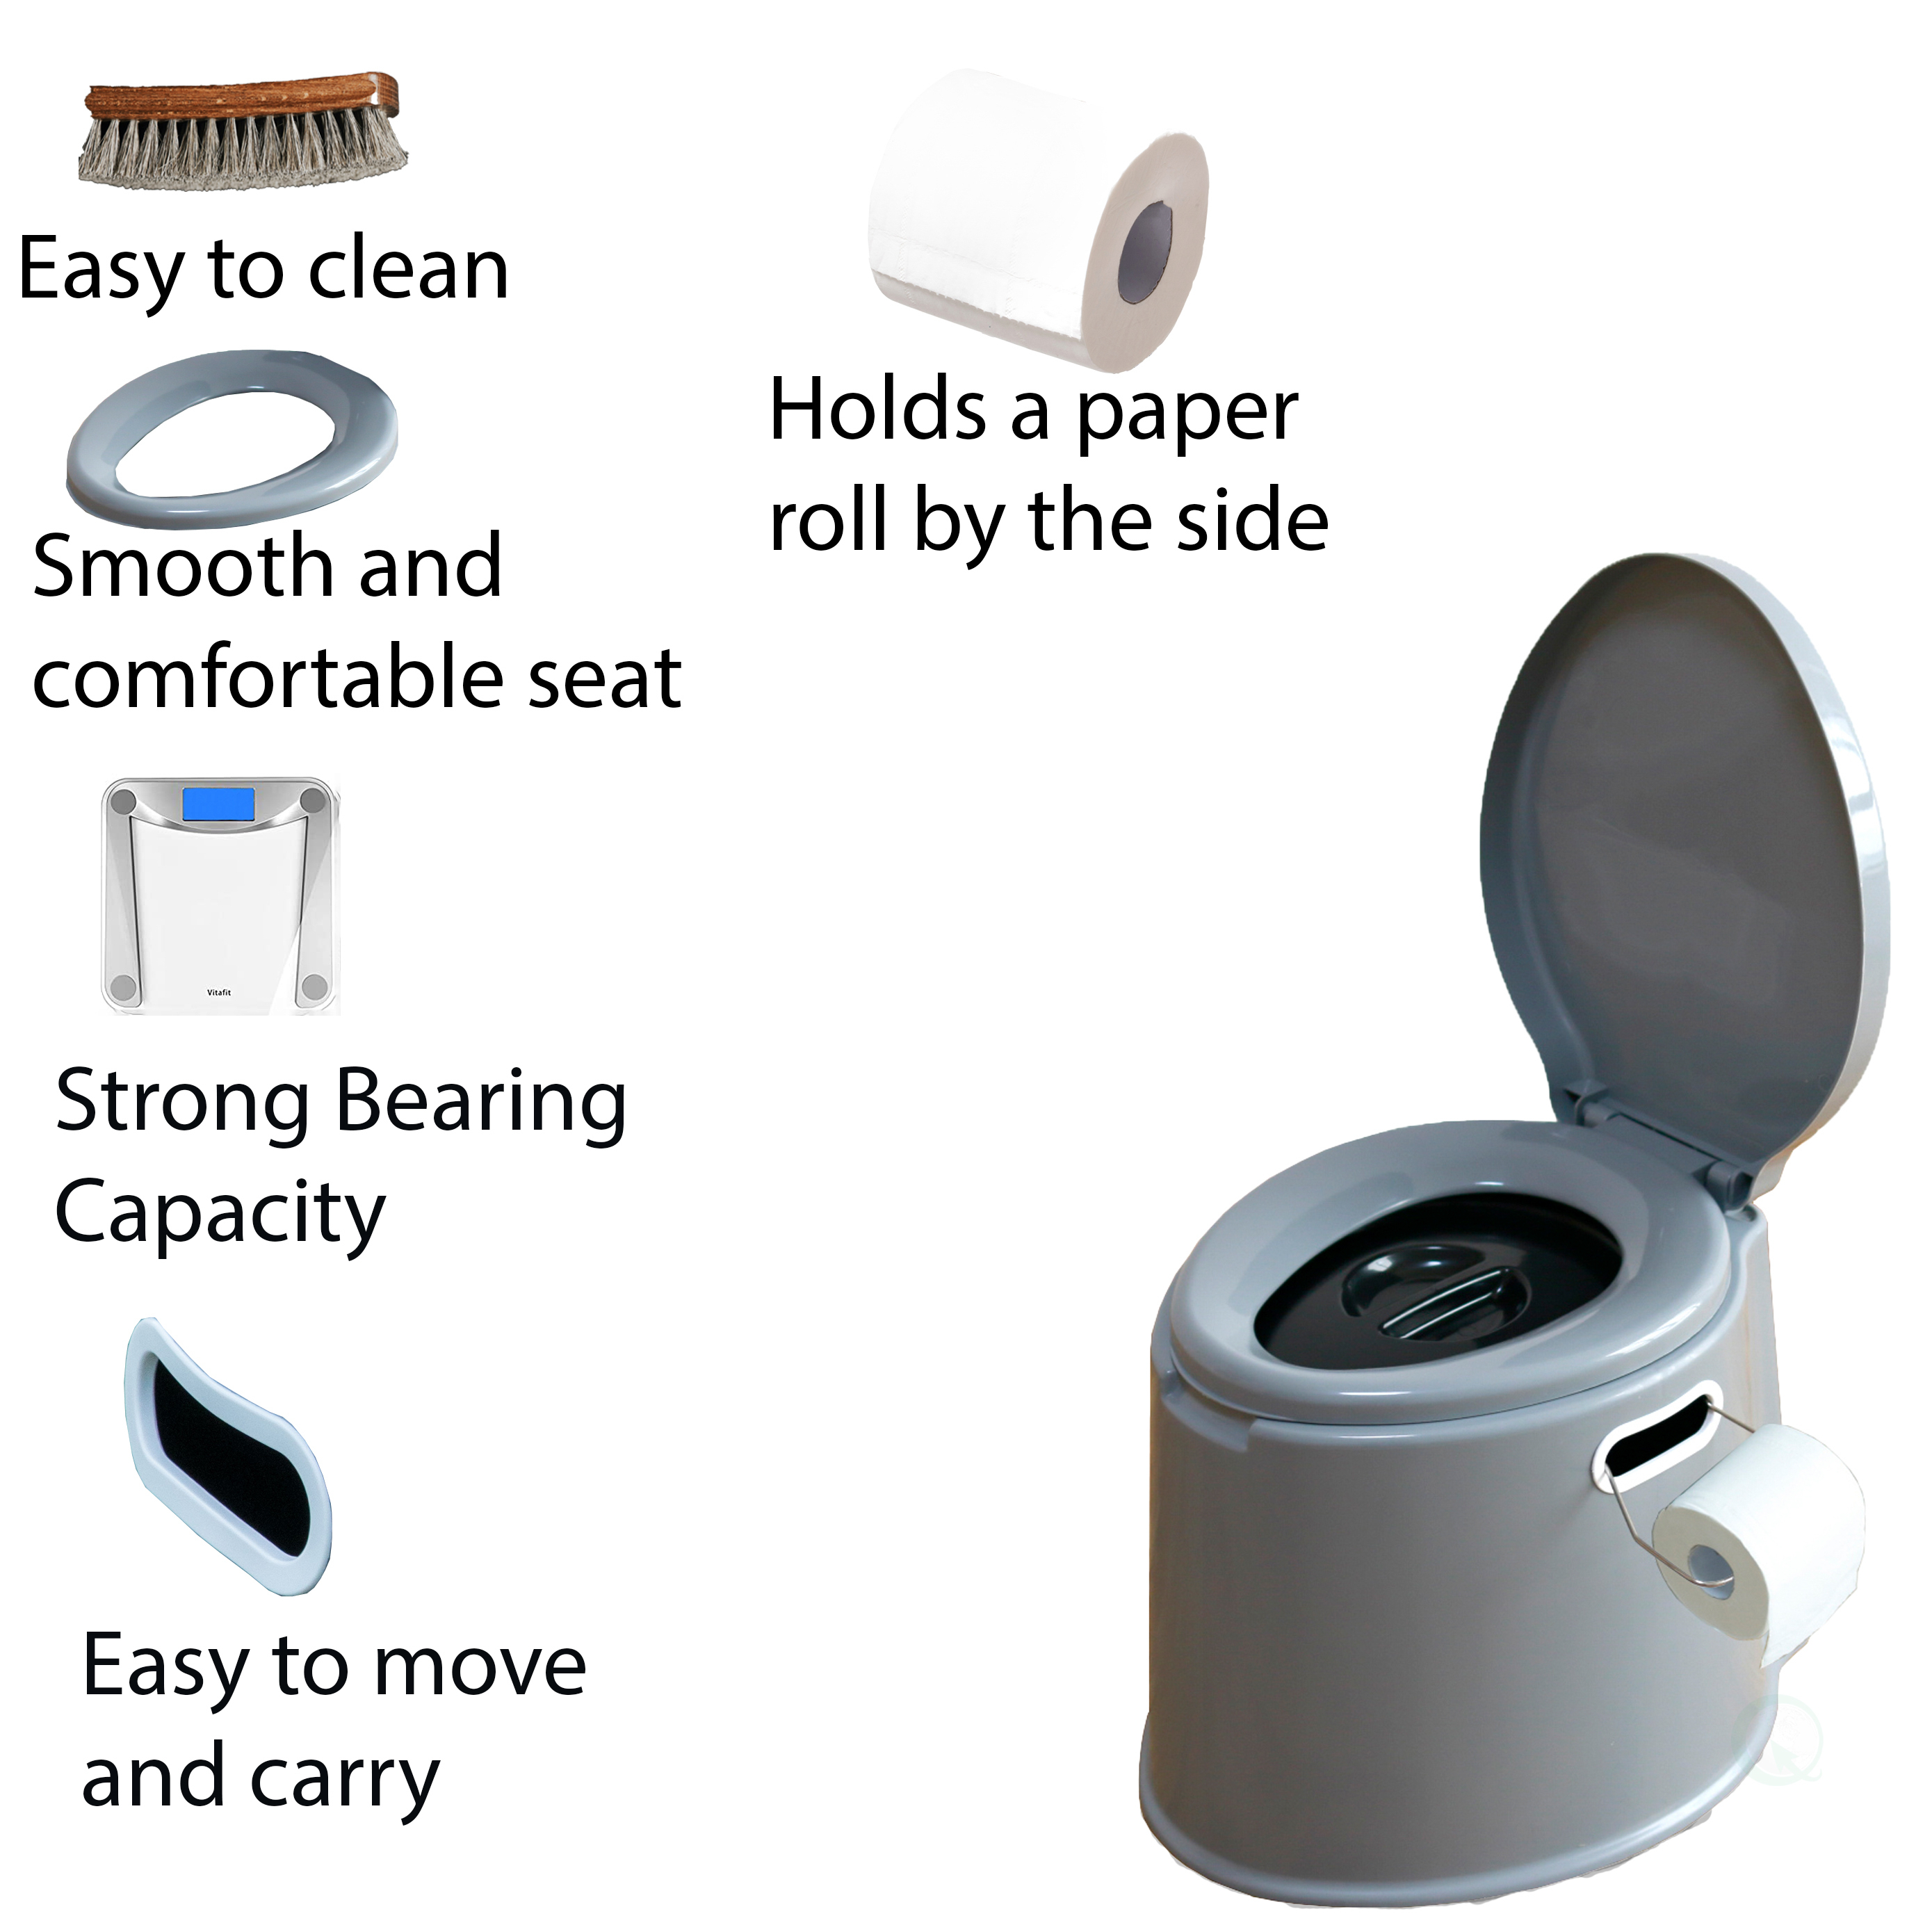 Portable Travel Toilet For Camping And Hiking - Toilet